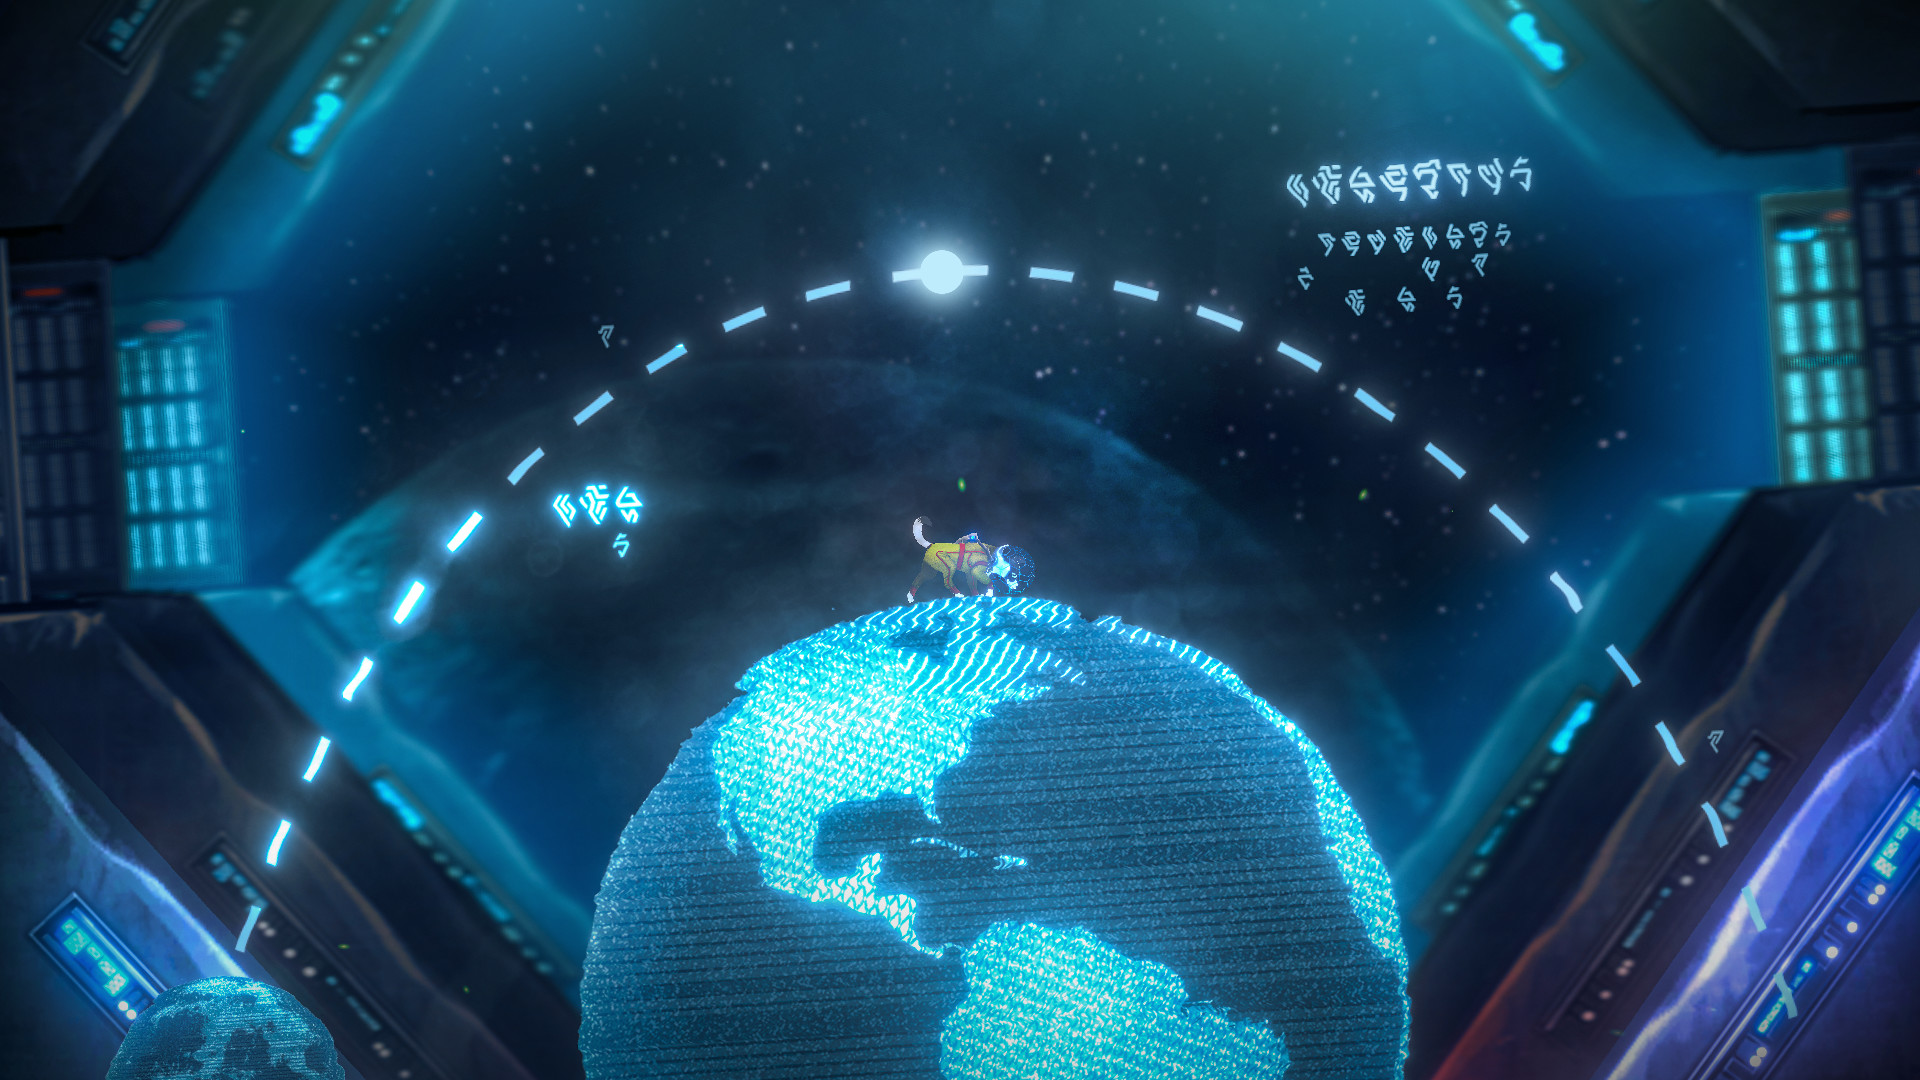 Space Tail: Every Journey Leads Home Free Download